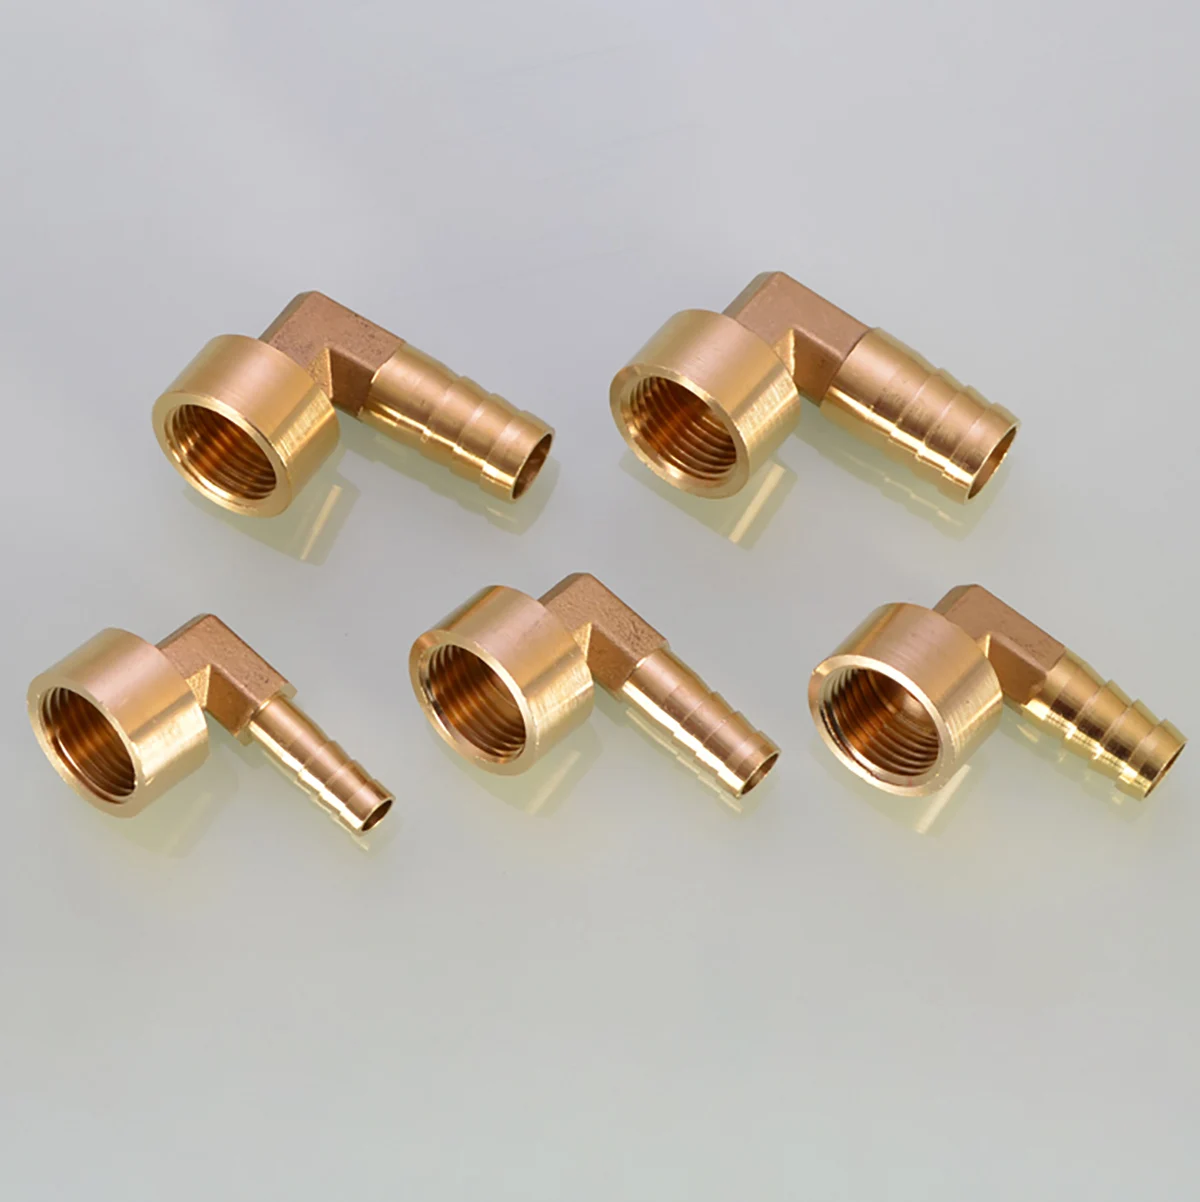 

Brass Elbow Connector 8mm 10mm 12mm 14mm 16mm Hose Barb to 1/4" 3/8" 1/2" Female BSP Thread Brass Pipe Fitting Joint Adapter